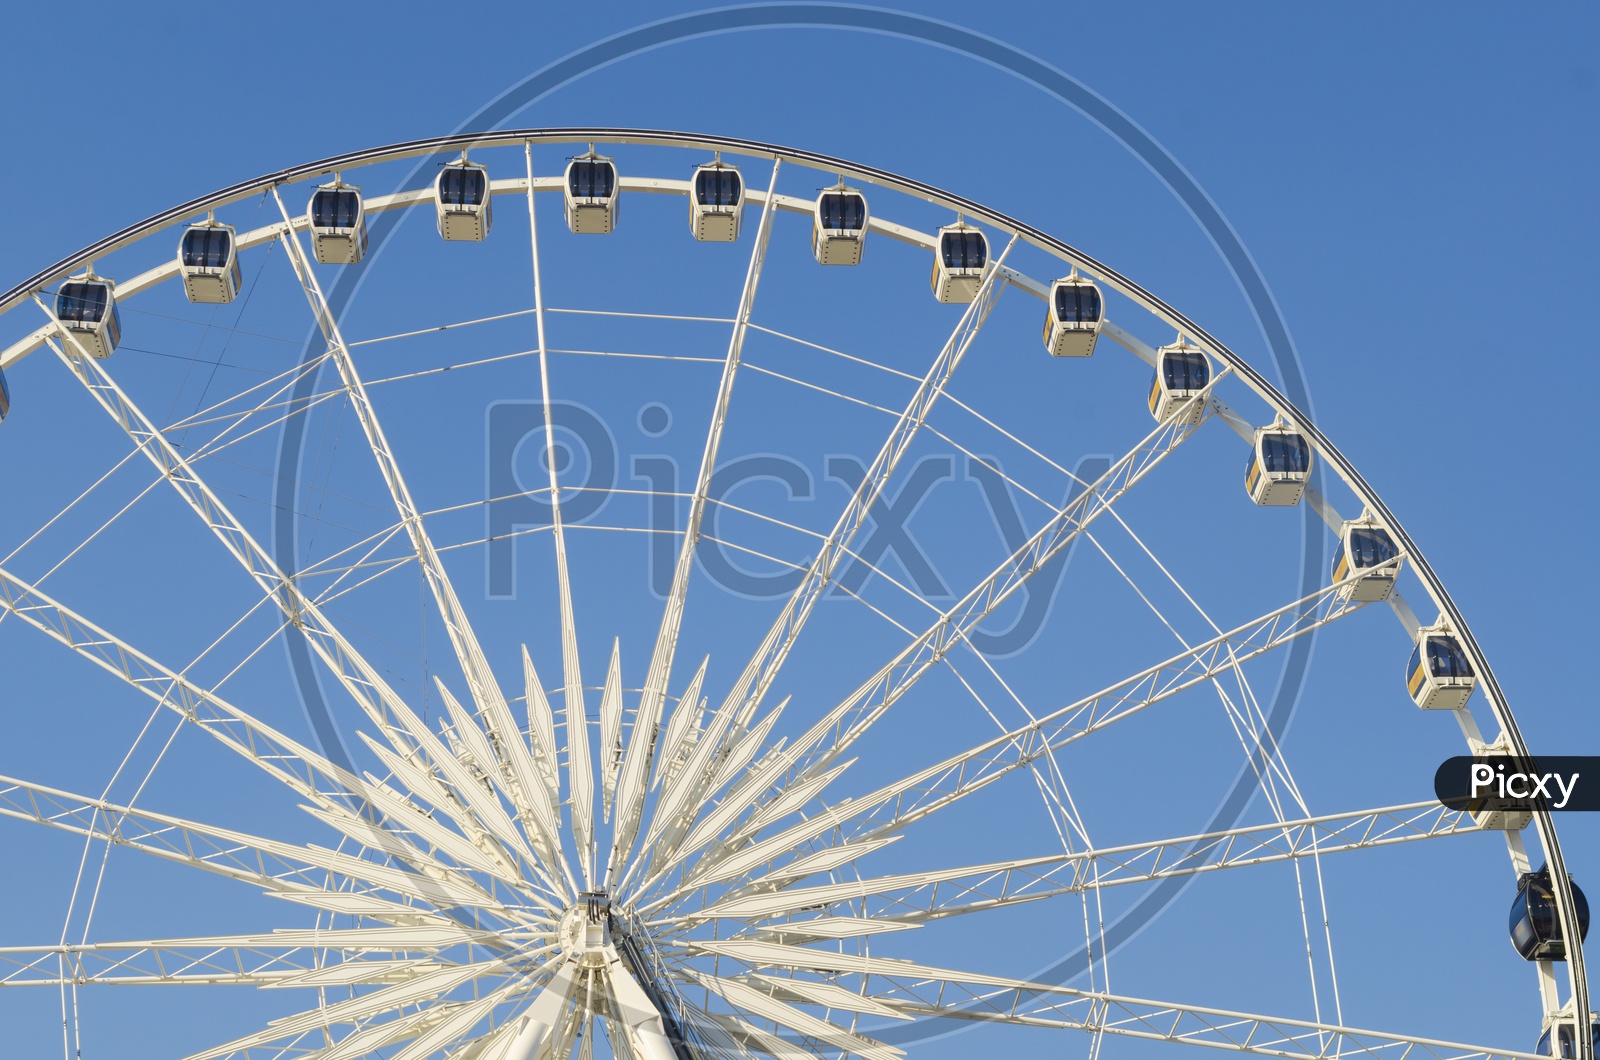 Beautiful large Ferris wheel with Sky in Background